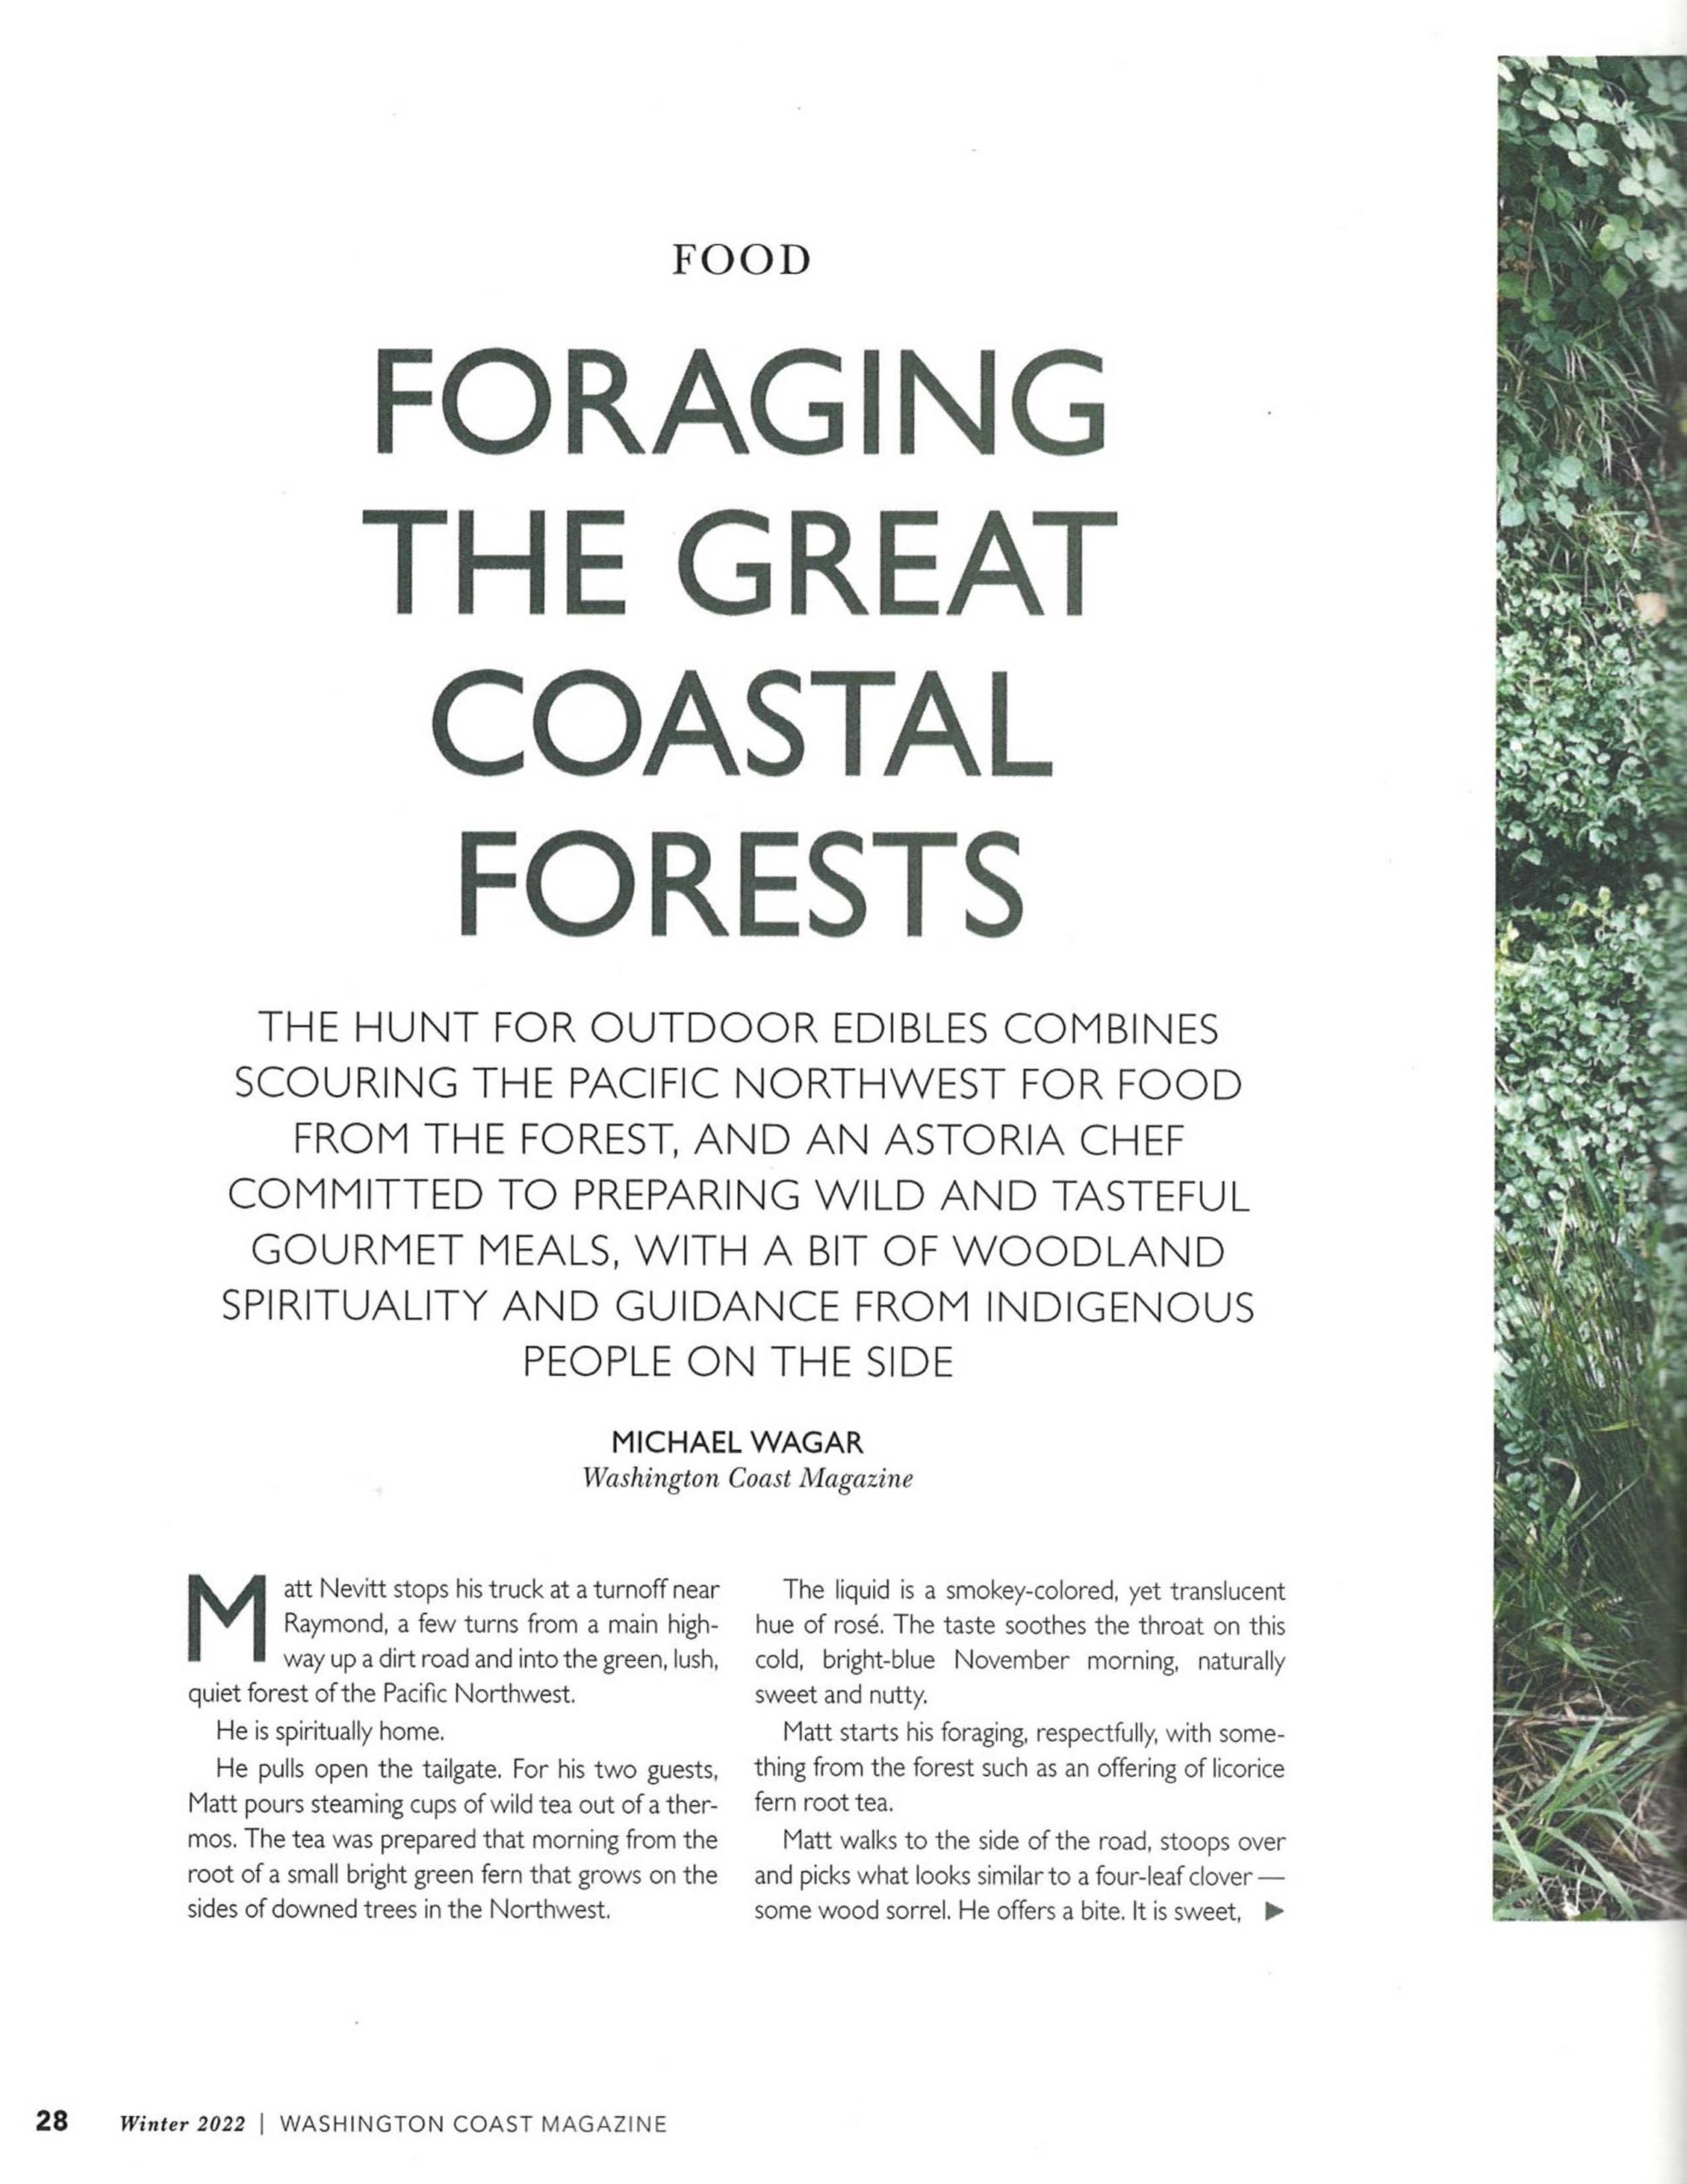 Foraging The Great Coastal Forests